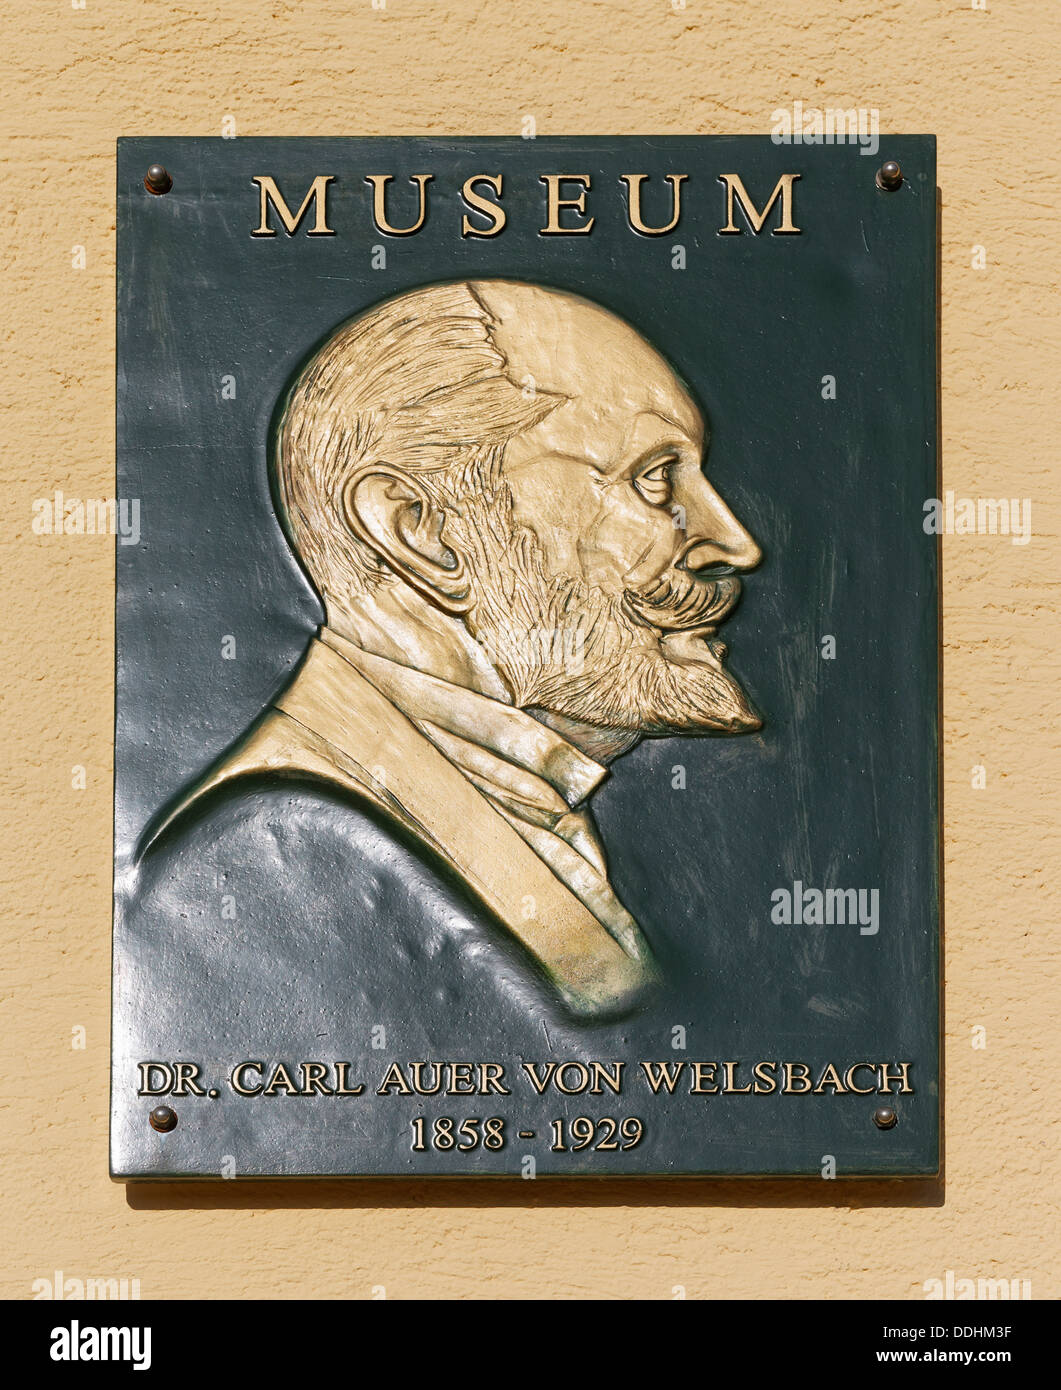 Plaque at the Carl Auer von Welsbach Museum Stock Photo